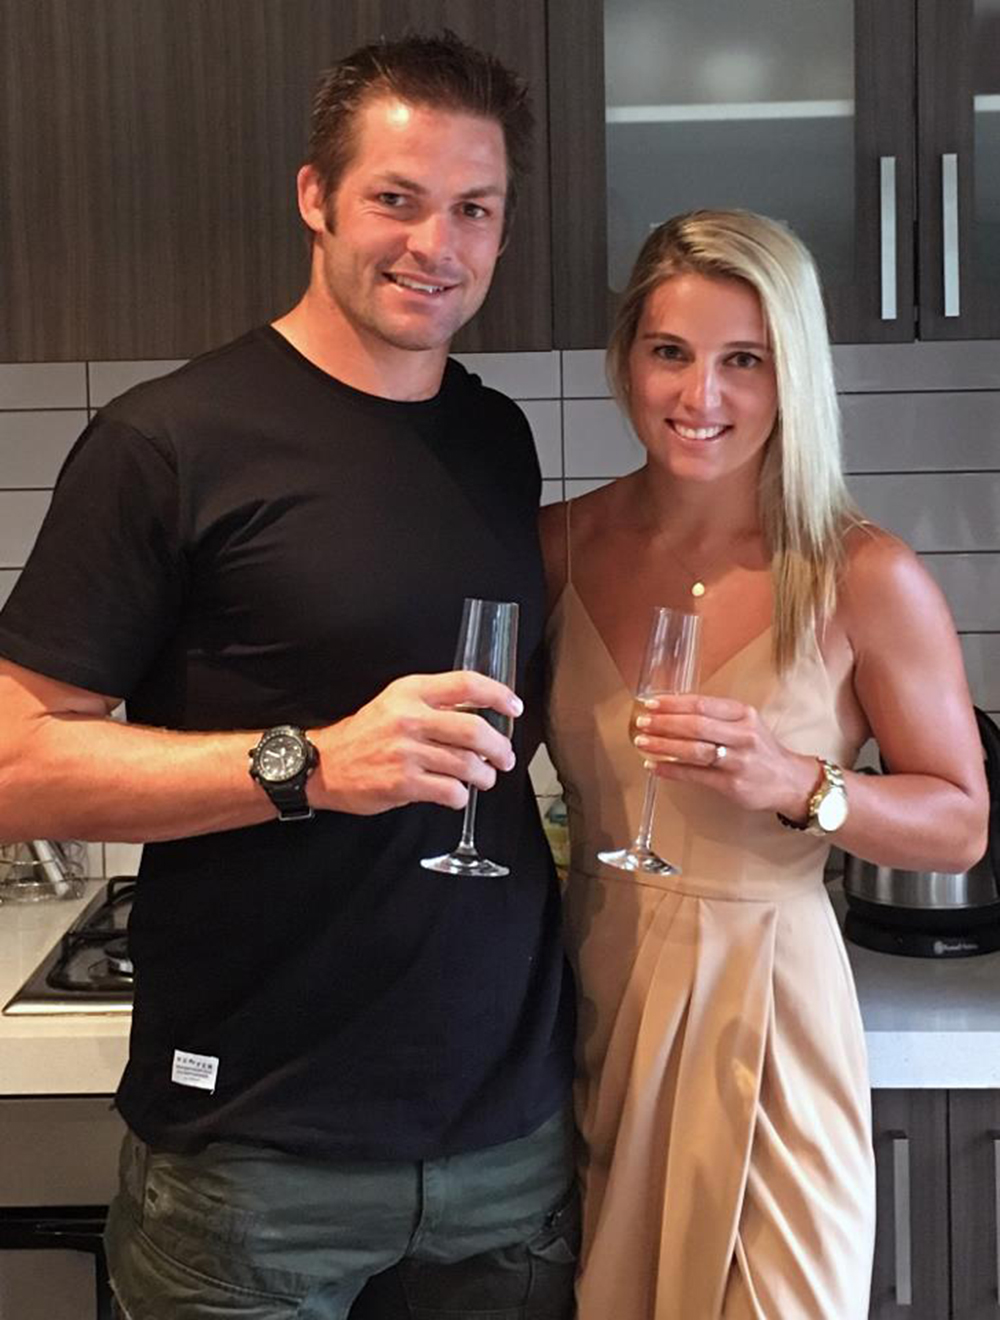 RICHIE MCCAW AND GEMMA FLYNN It's a match made in sporting heaven. Former All Black captain McCaw proposed to his Black Sticks hockey player girlfriend over the New Year and the pair celebrated with family and friends in central Otago.